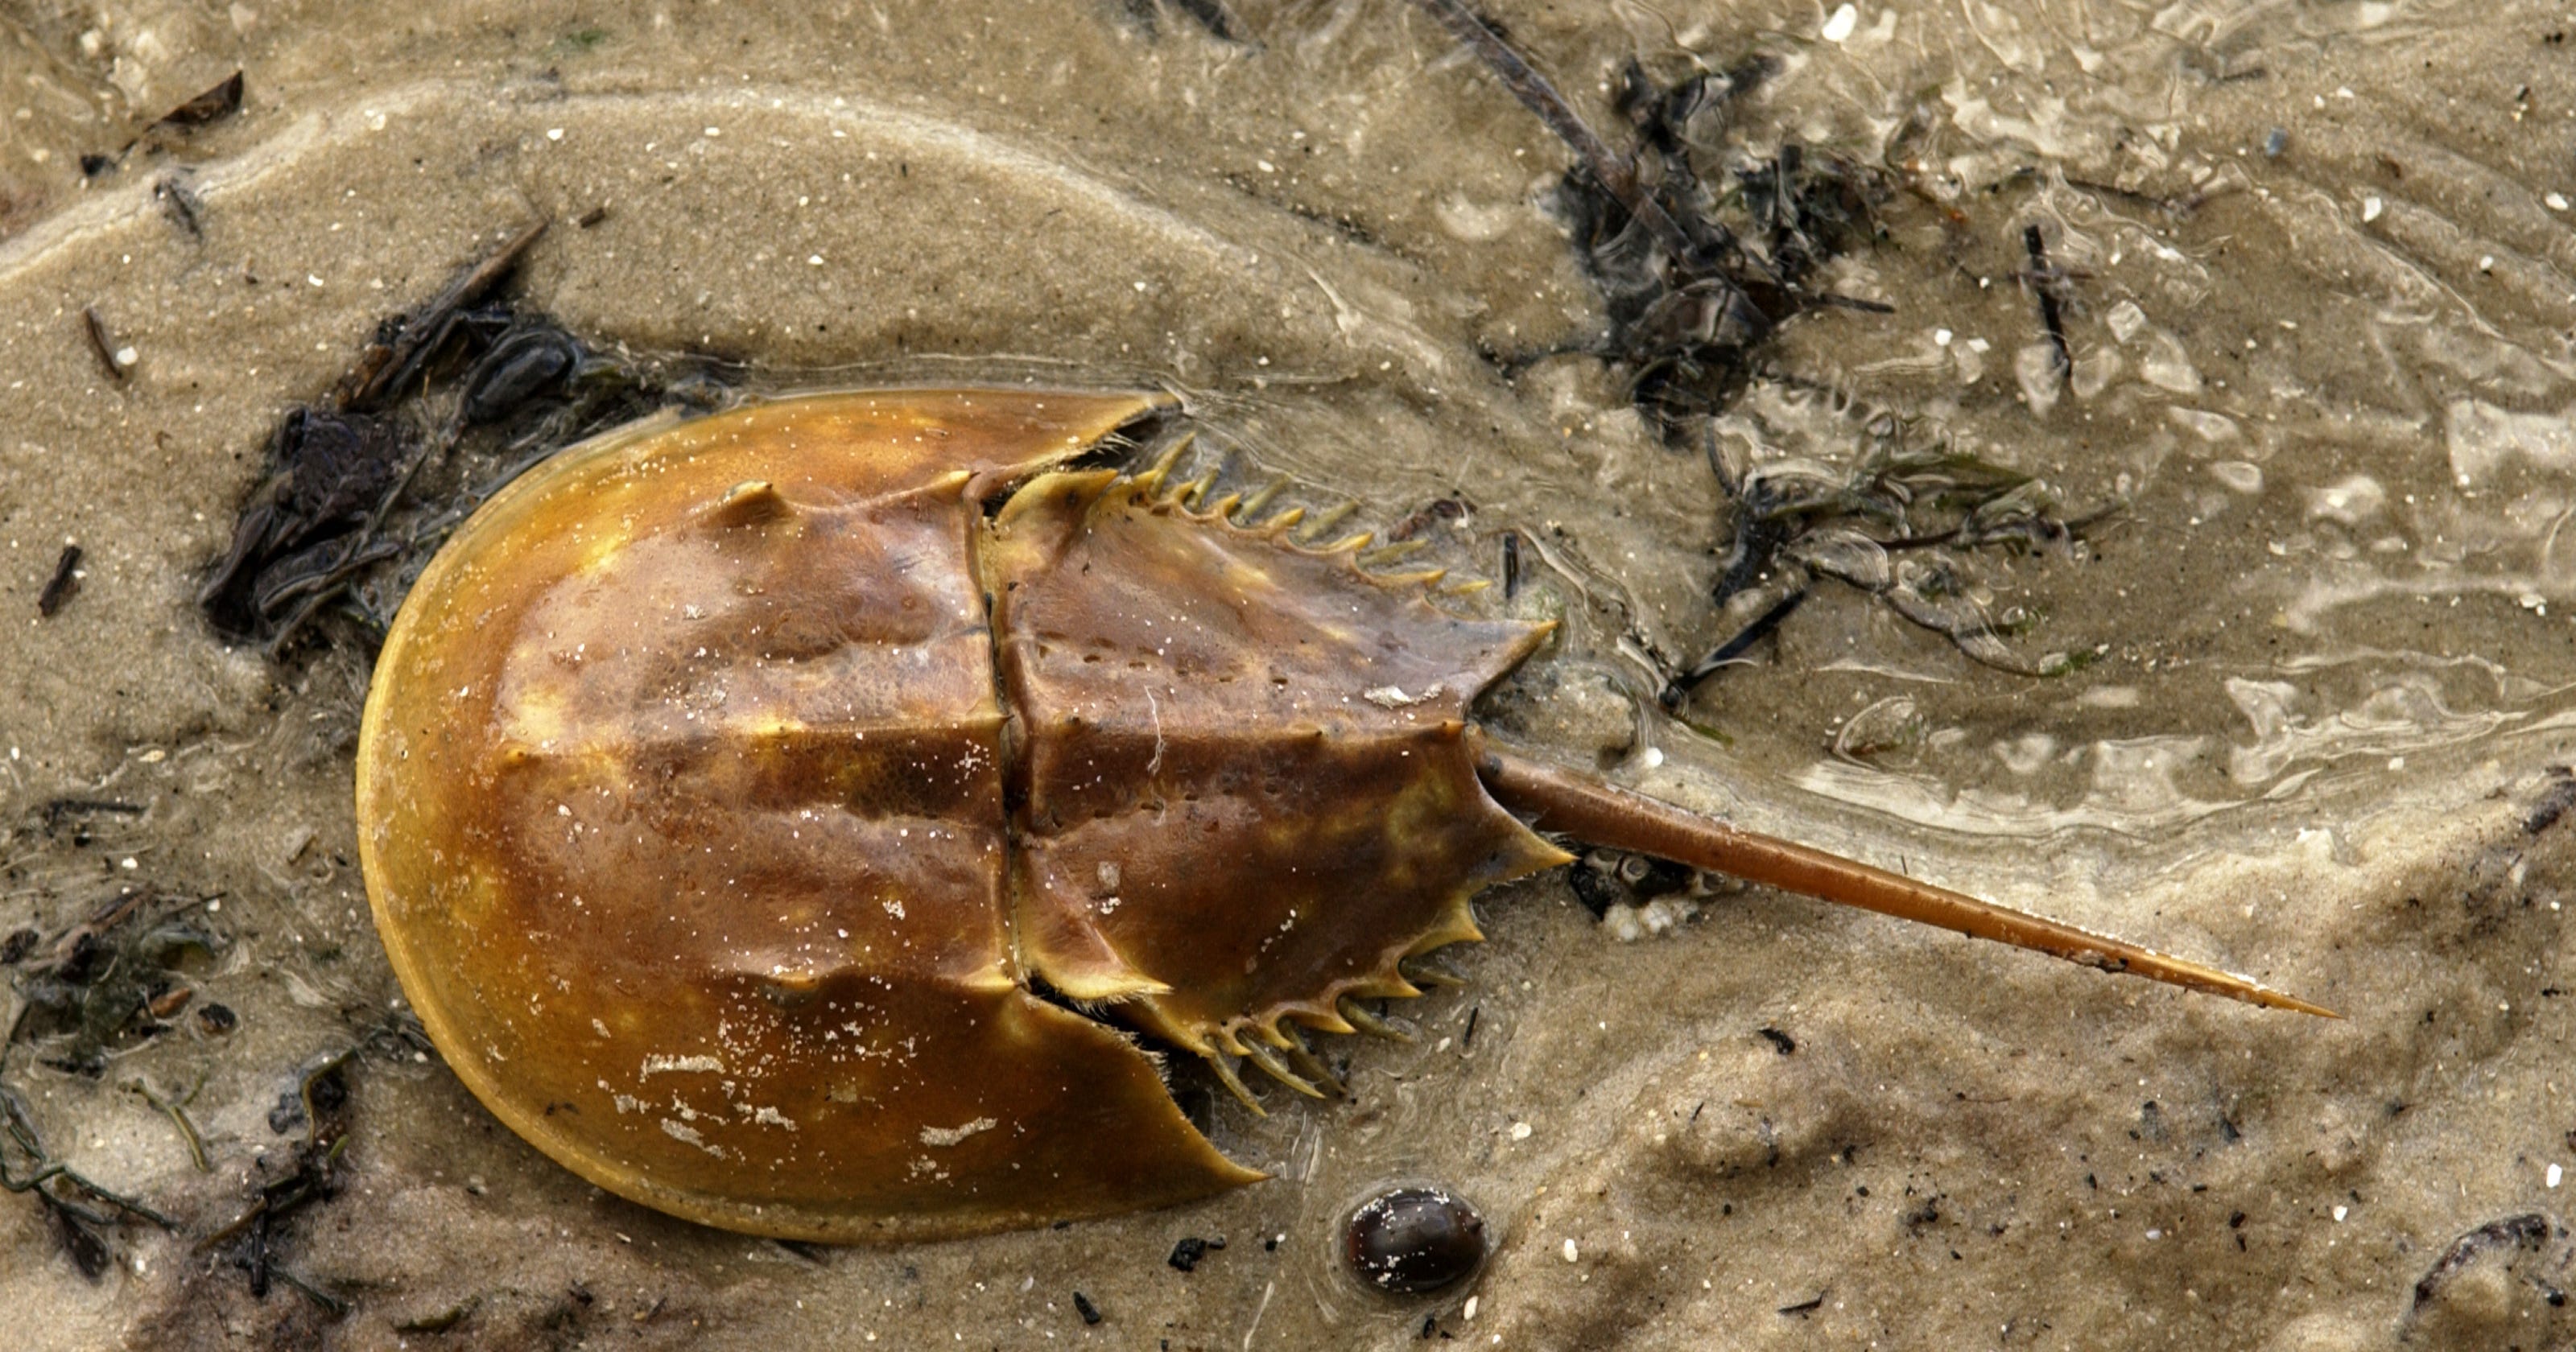 Watch for horseshoe crabs, especially ones mating